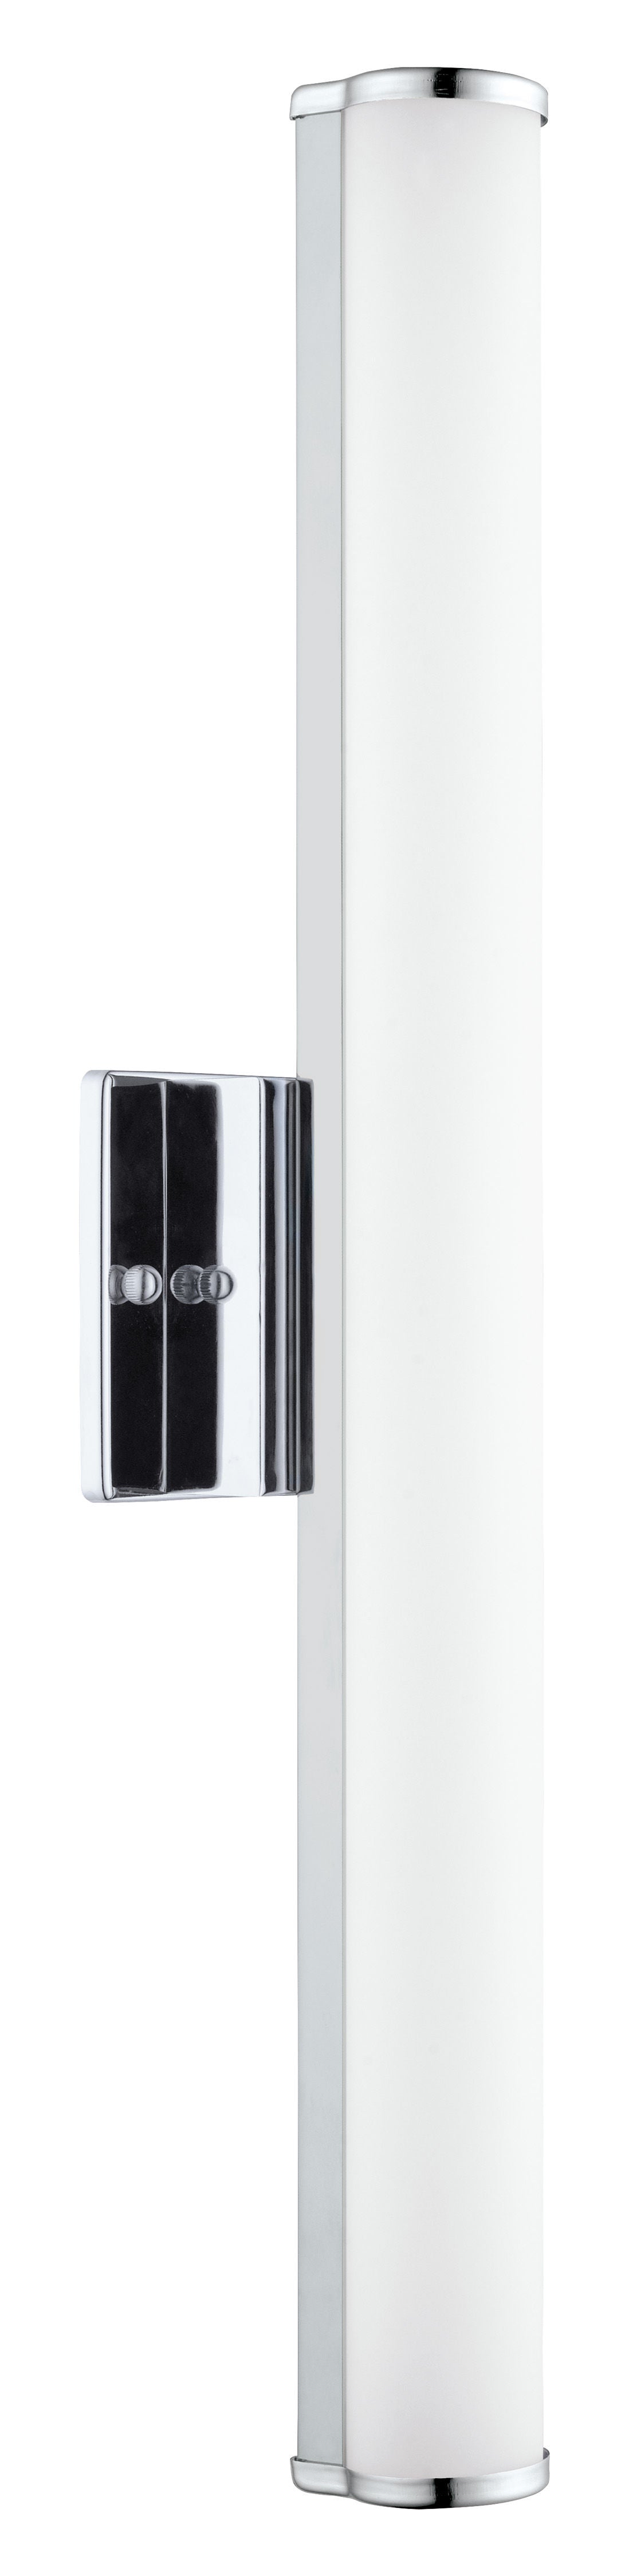 Miere Sconce Chrome INTEGRATED LED - 202364A | EGLO